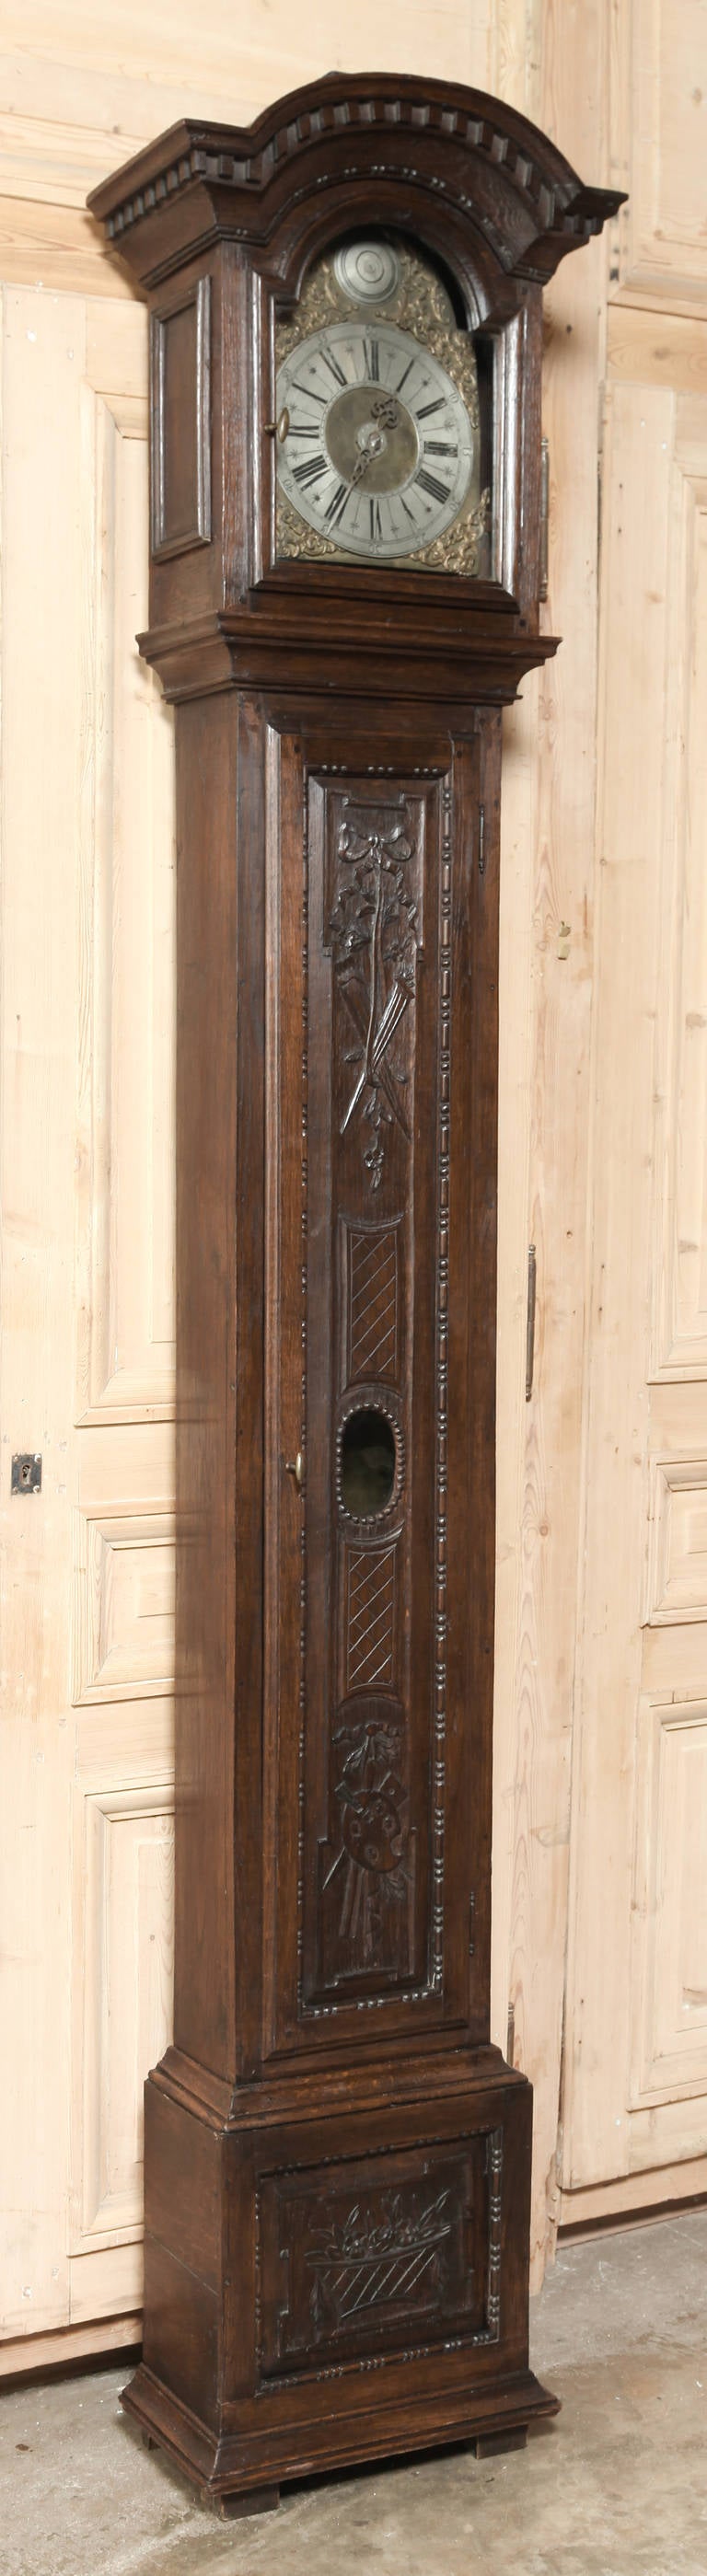 Hand-Carved 18th Century French Long Case Clock